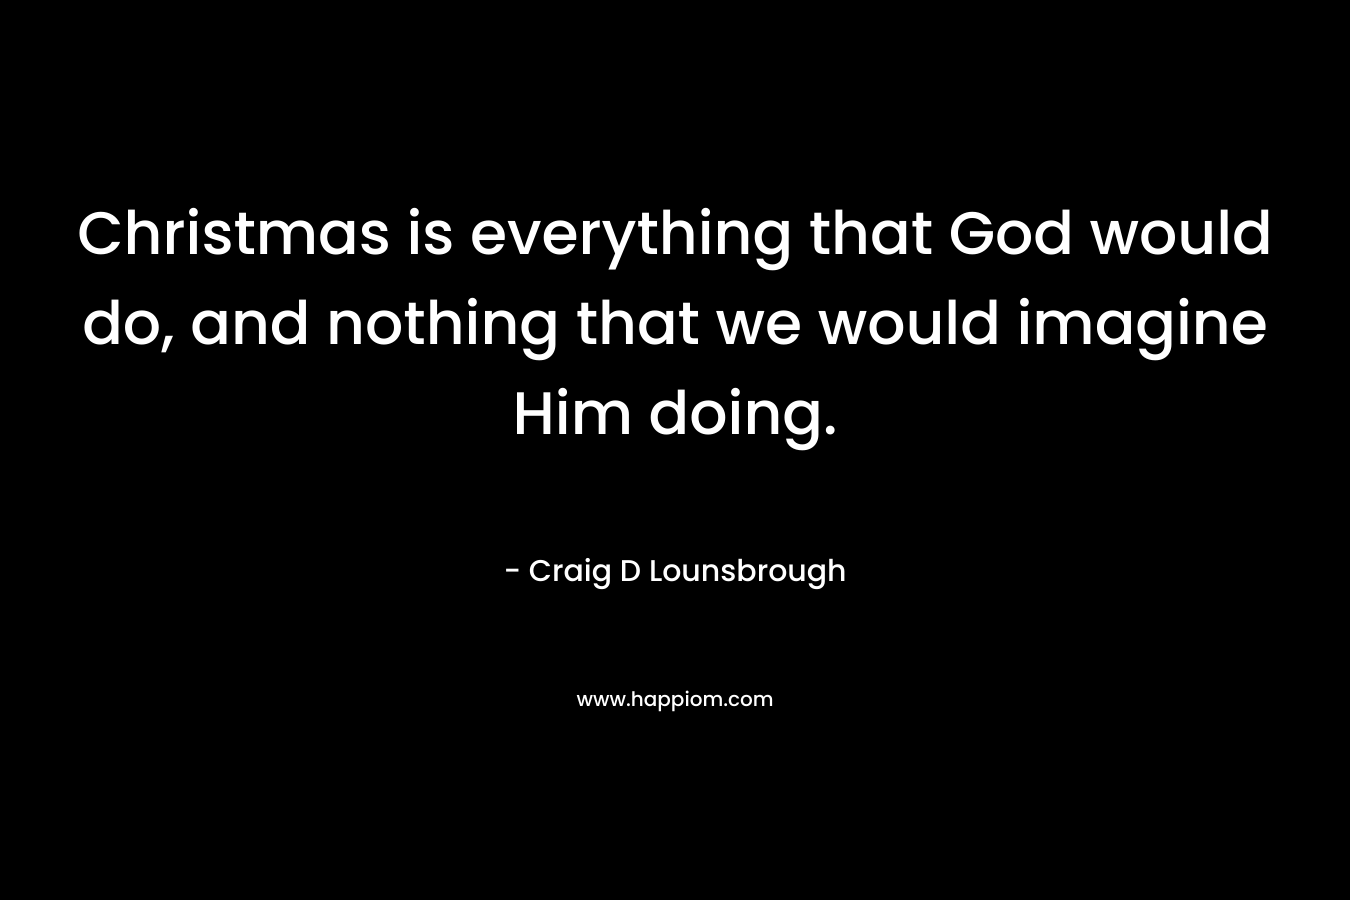 Christmas is everything that God would do, and nothing that we would imagine Him doing. – Craig D Lounsbrough